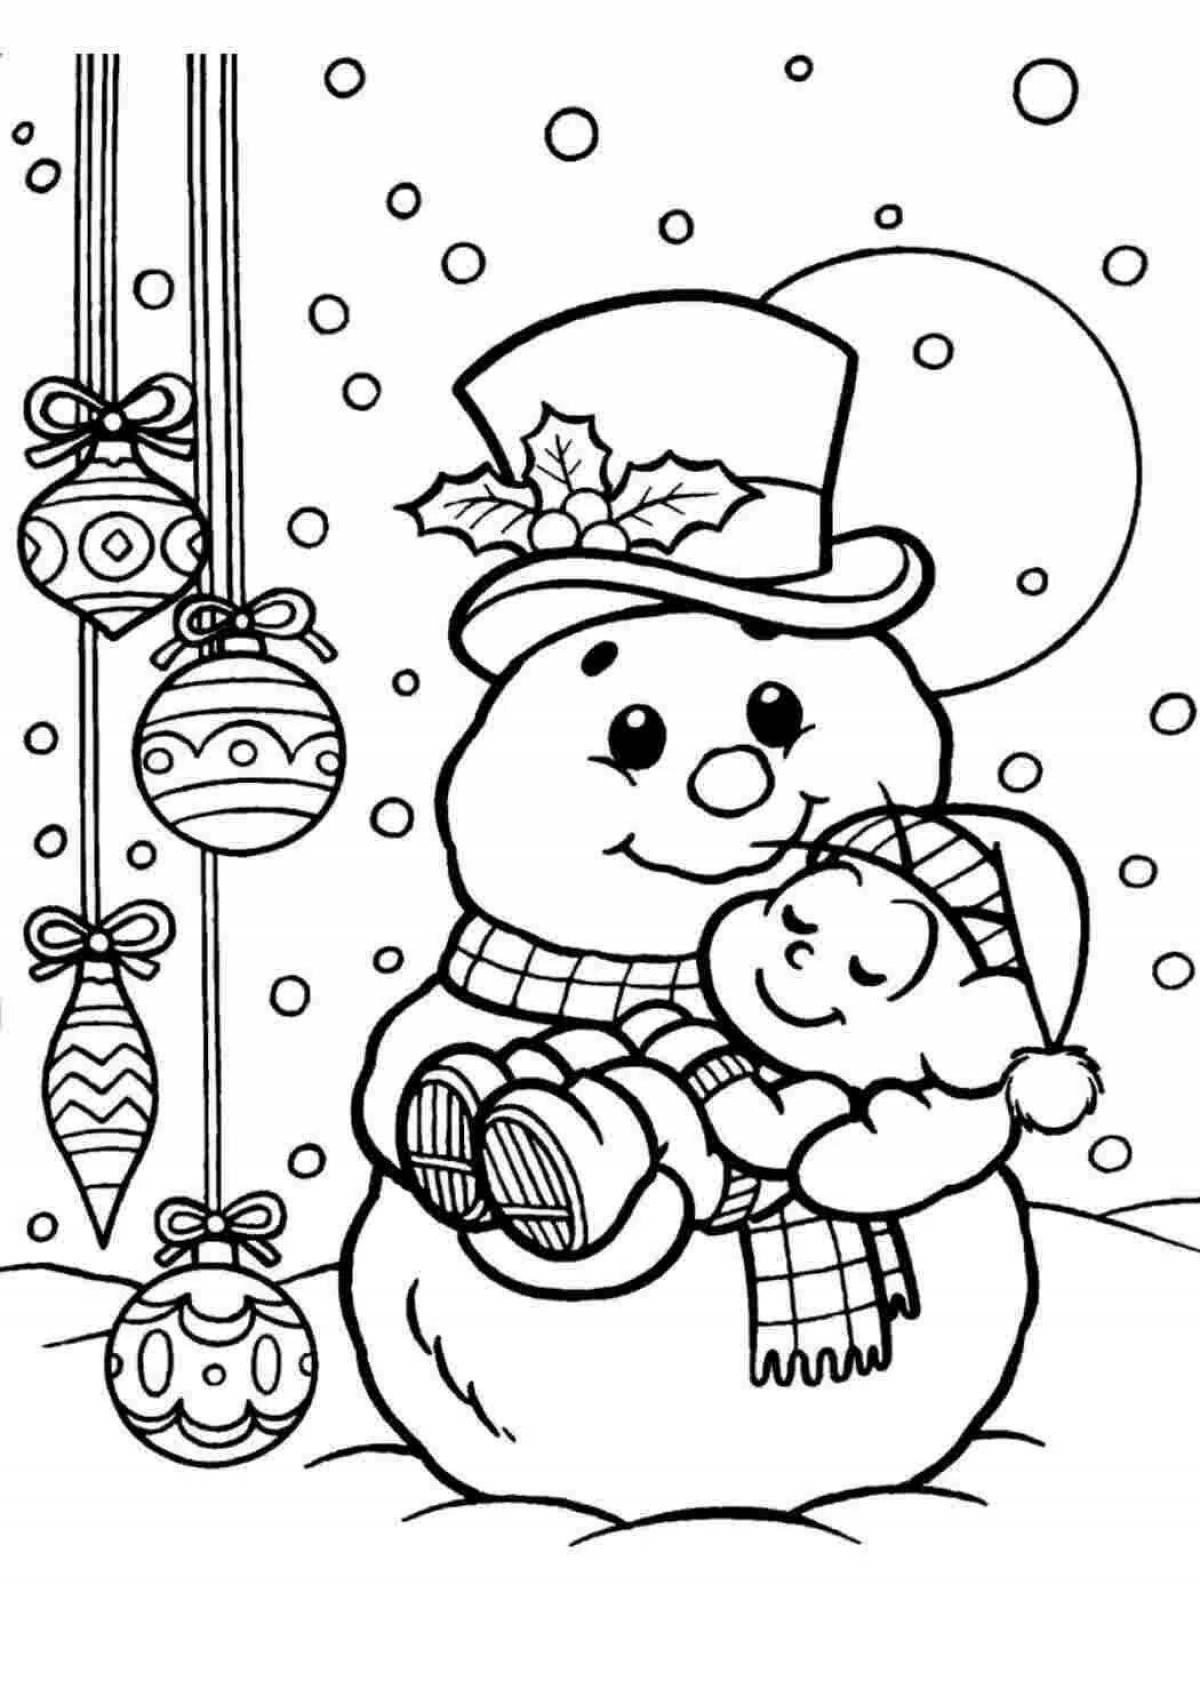 Cute snowman holiday coloring book